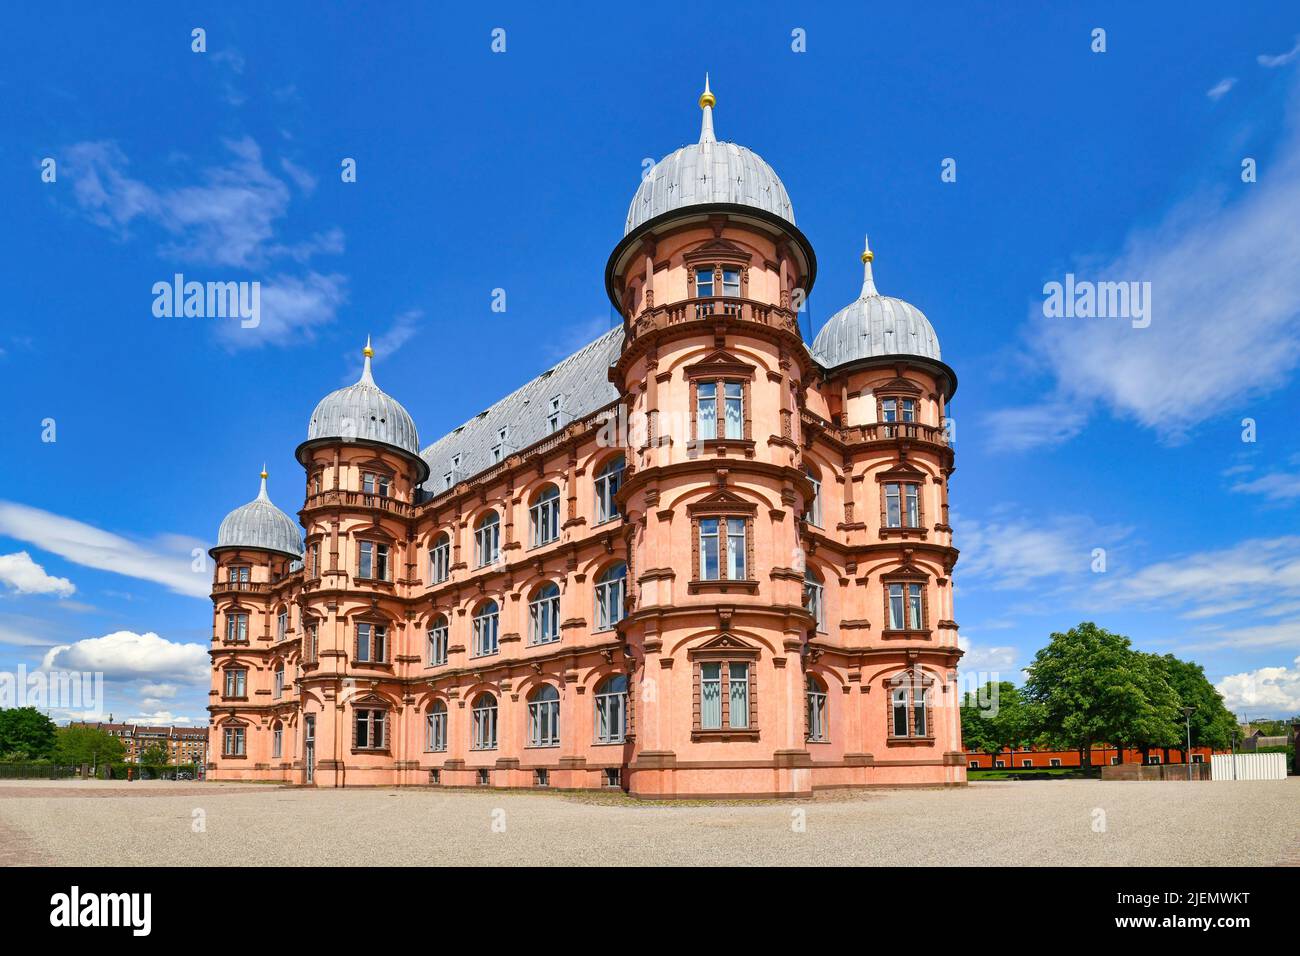 Renaissance castle called 'Schloss Gottesaue' in Karlsruhe city in Germany.  Seat of the Karlsruhe University of Music Stock Photo